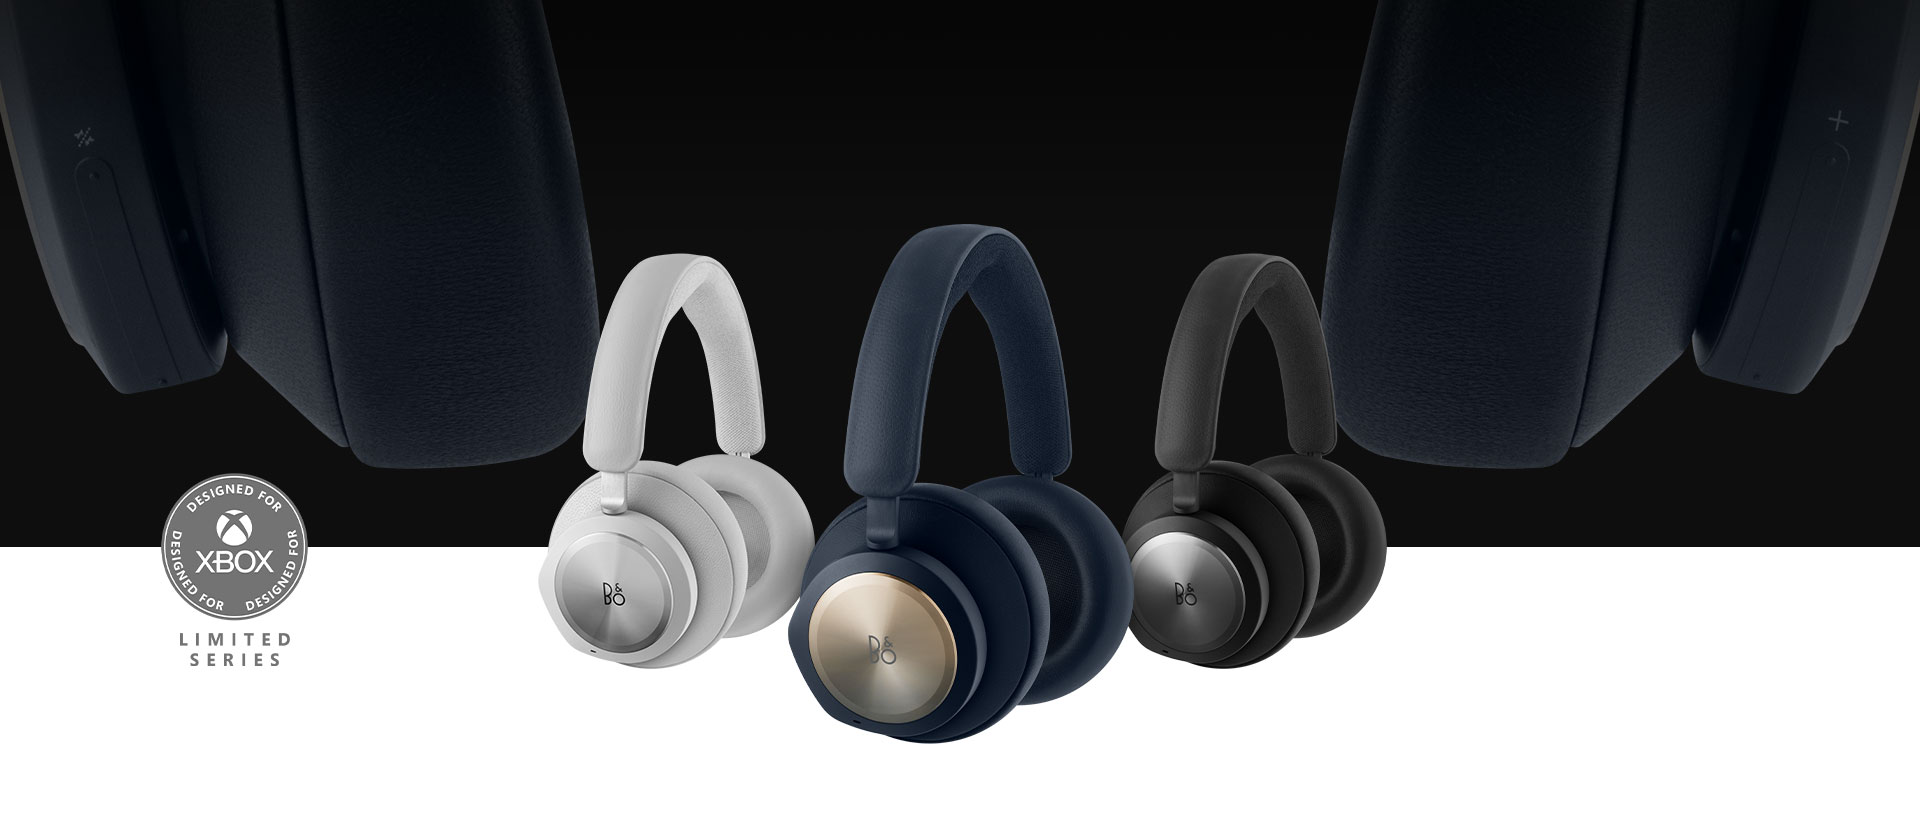 Designed for Xbox badge, Limited Series, Bang and Olufsen navy headset in front with the black and grey headset beside it